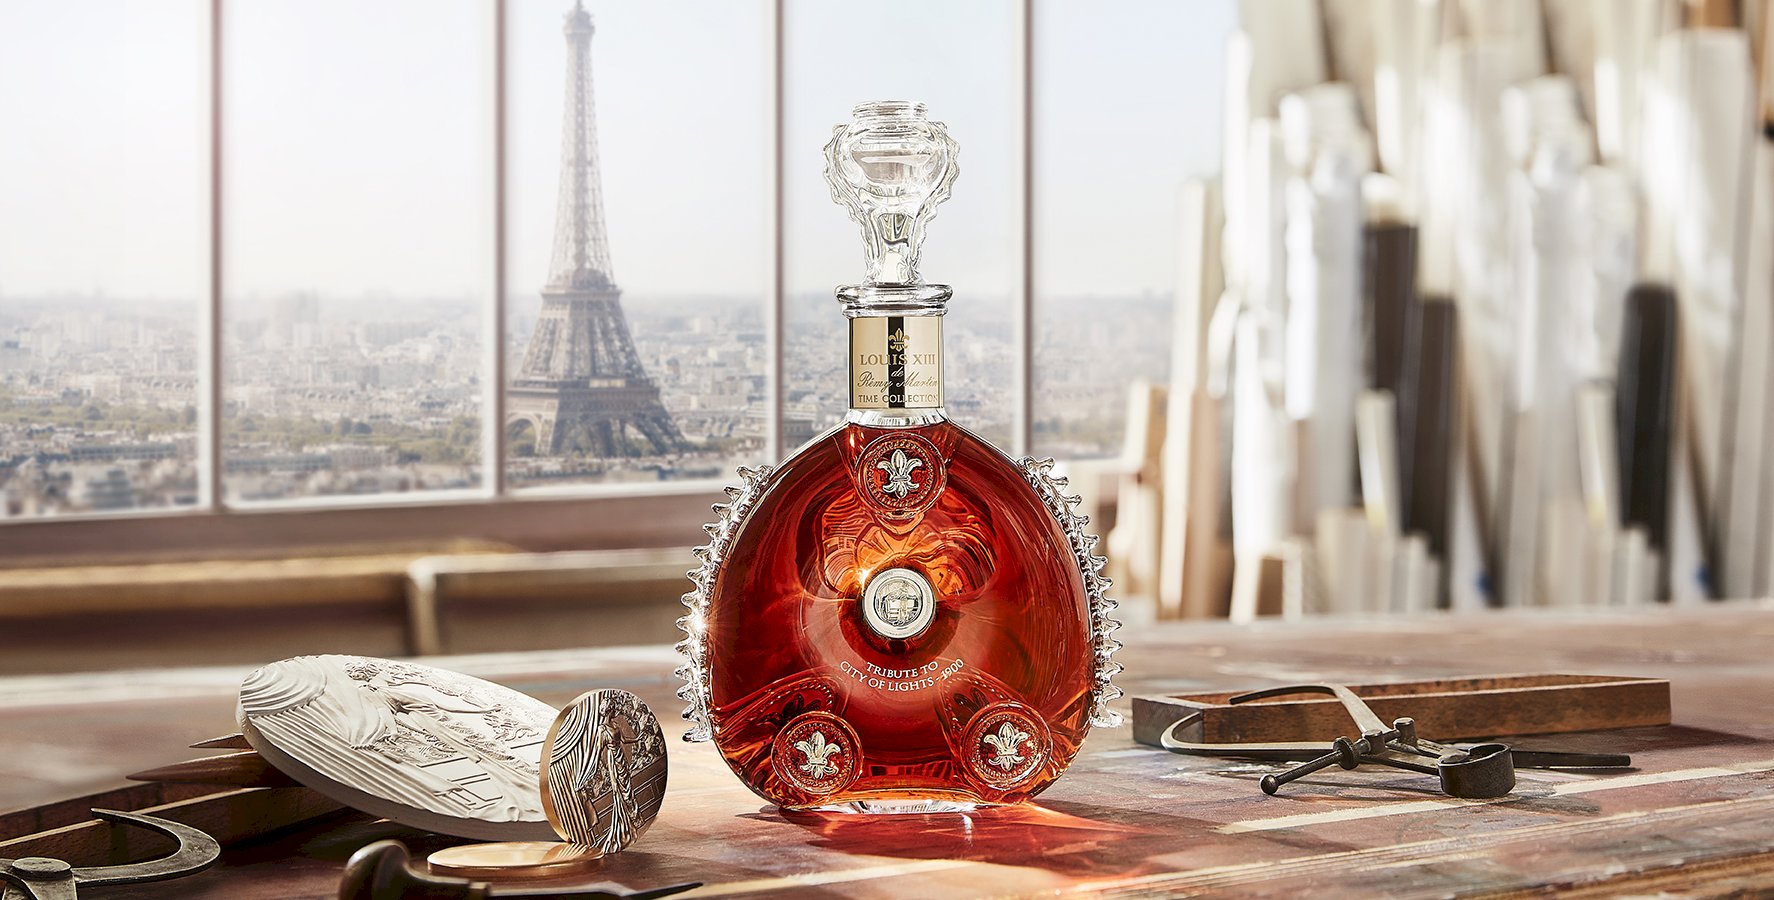 Ophorus Tours - A Private Visit & Tasting Rémy Martin Introduction to Louis XIII Cognac